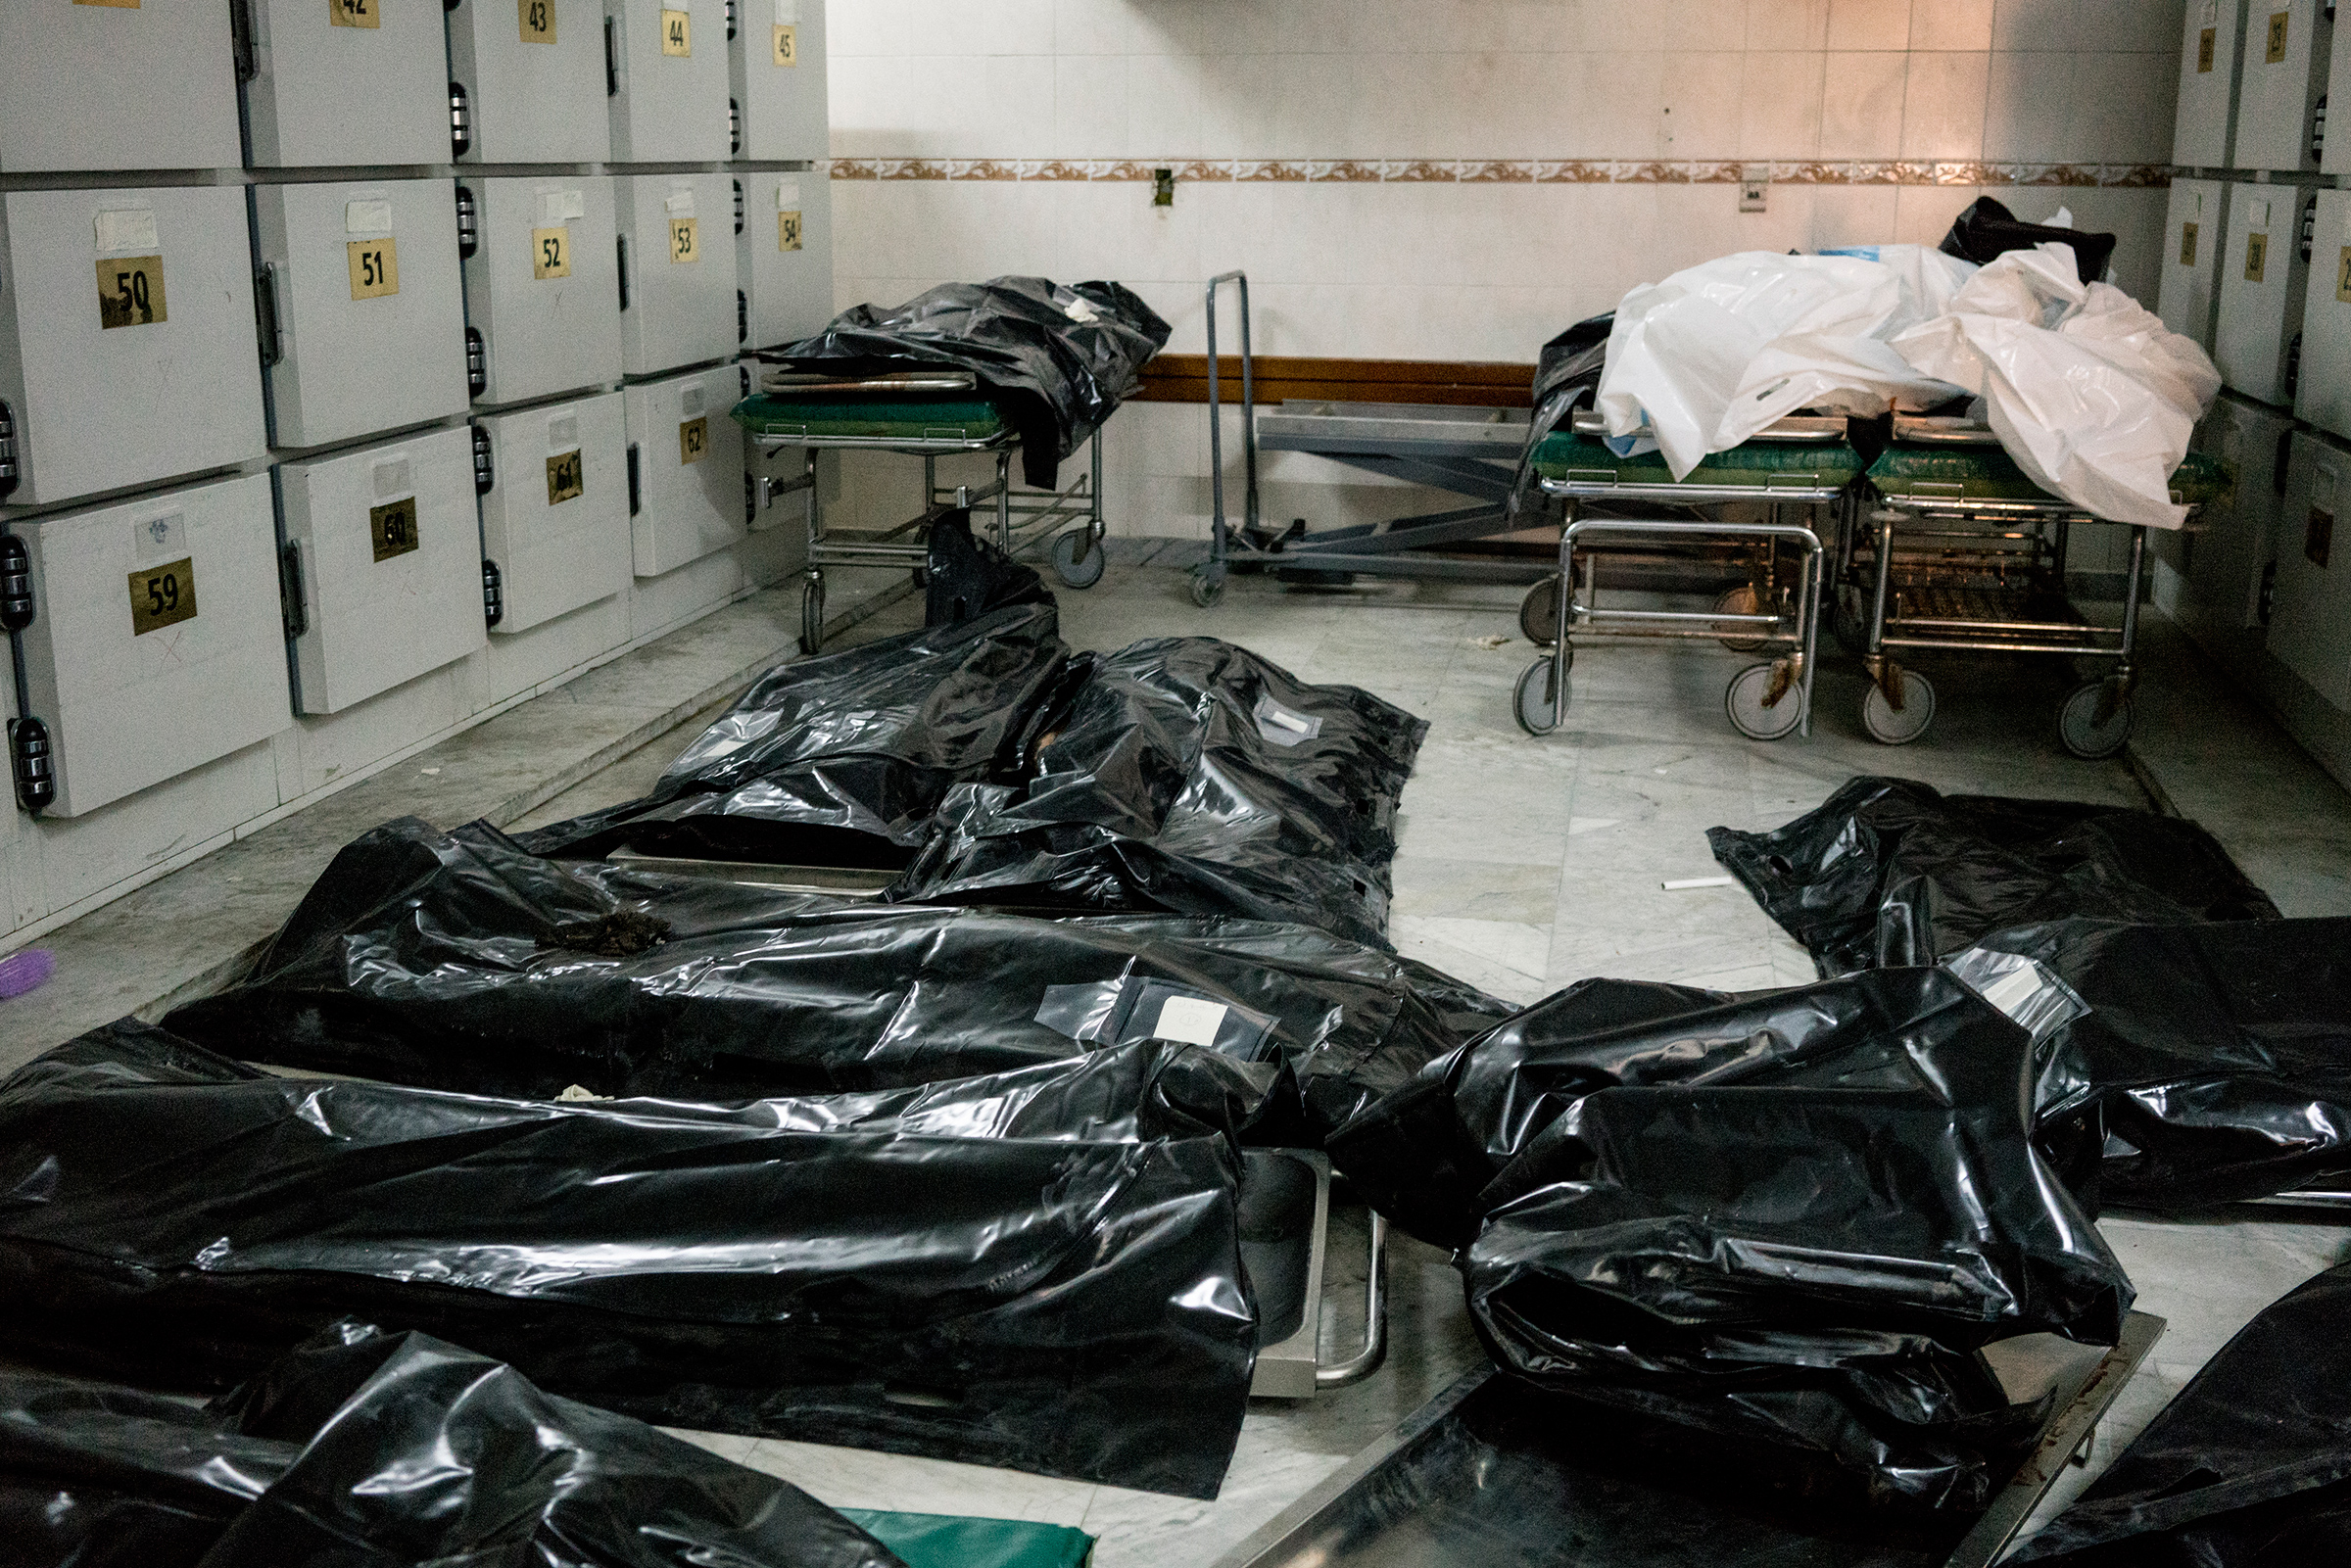 Bodies of migrants killed in the airstrike lay on the floor of the Tripoli Central Hospital morgue. (Emanuele Satolli)